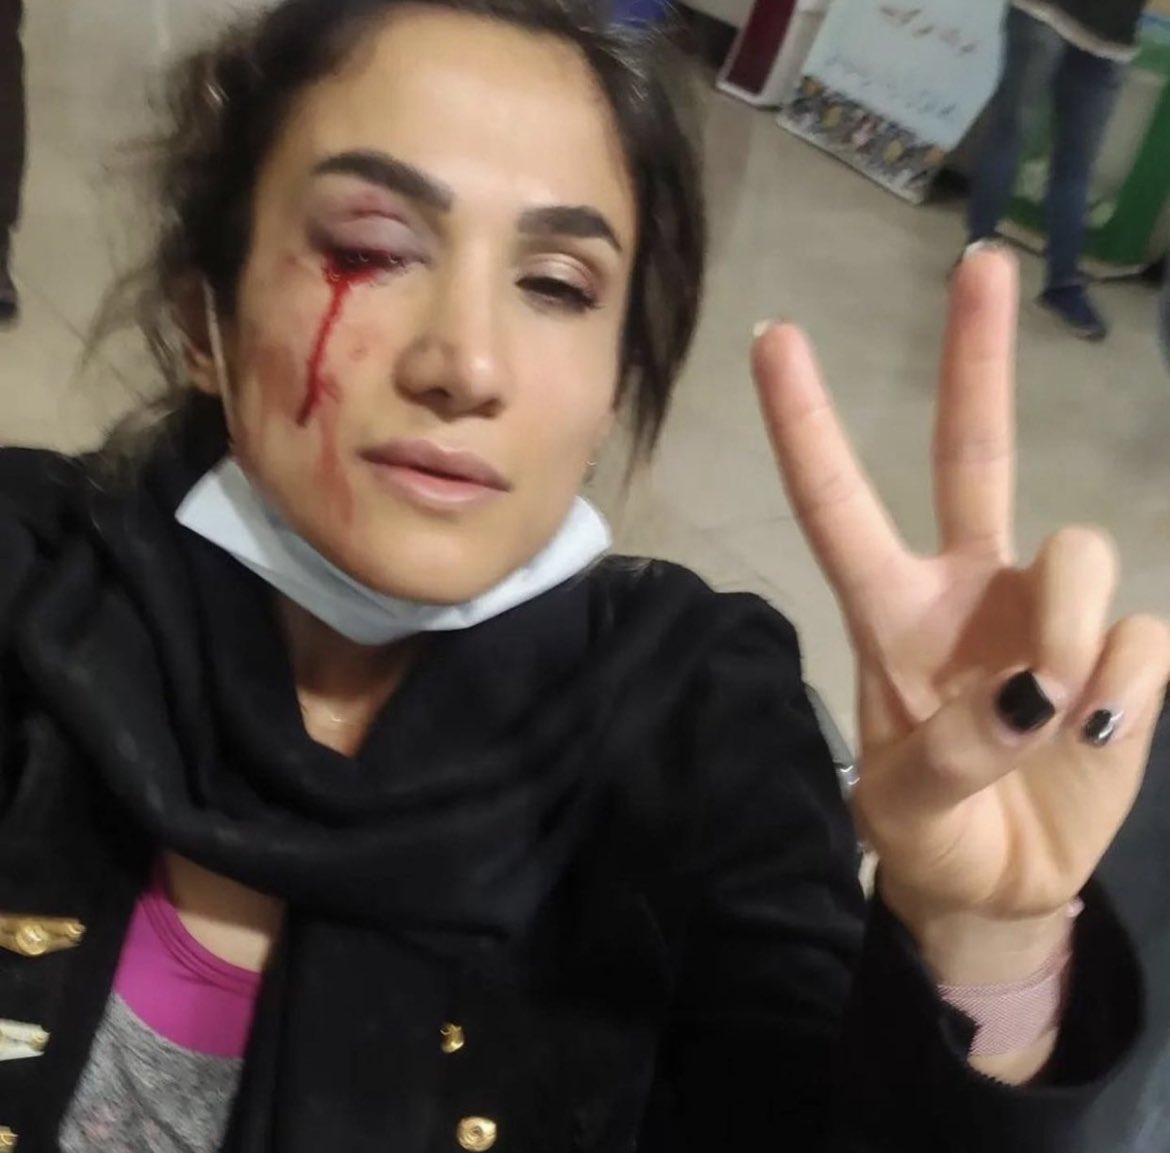 They blinded her gaze nevertheless couldn’t rupture her spirit. Iranian girl shot in gaze by Islamic Republic safety forces.